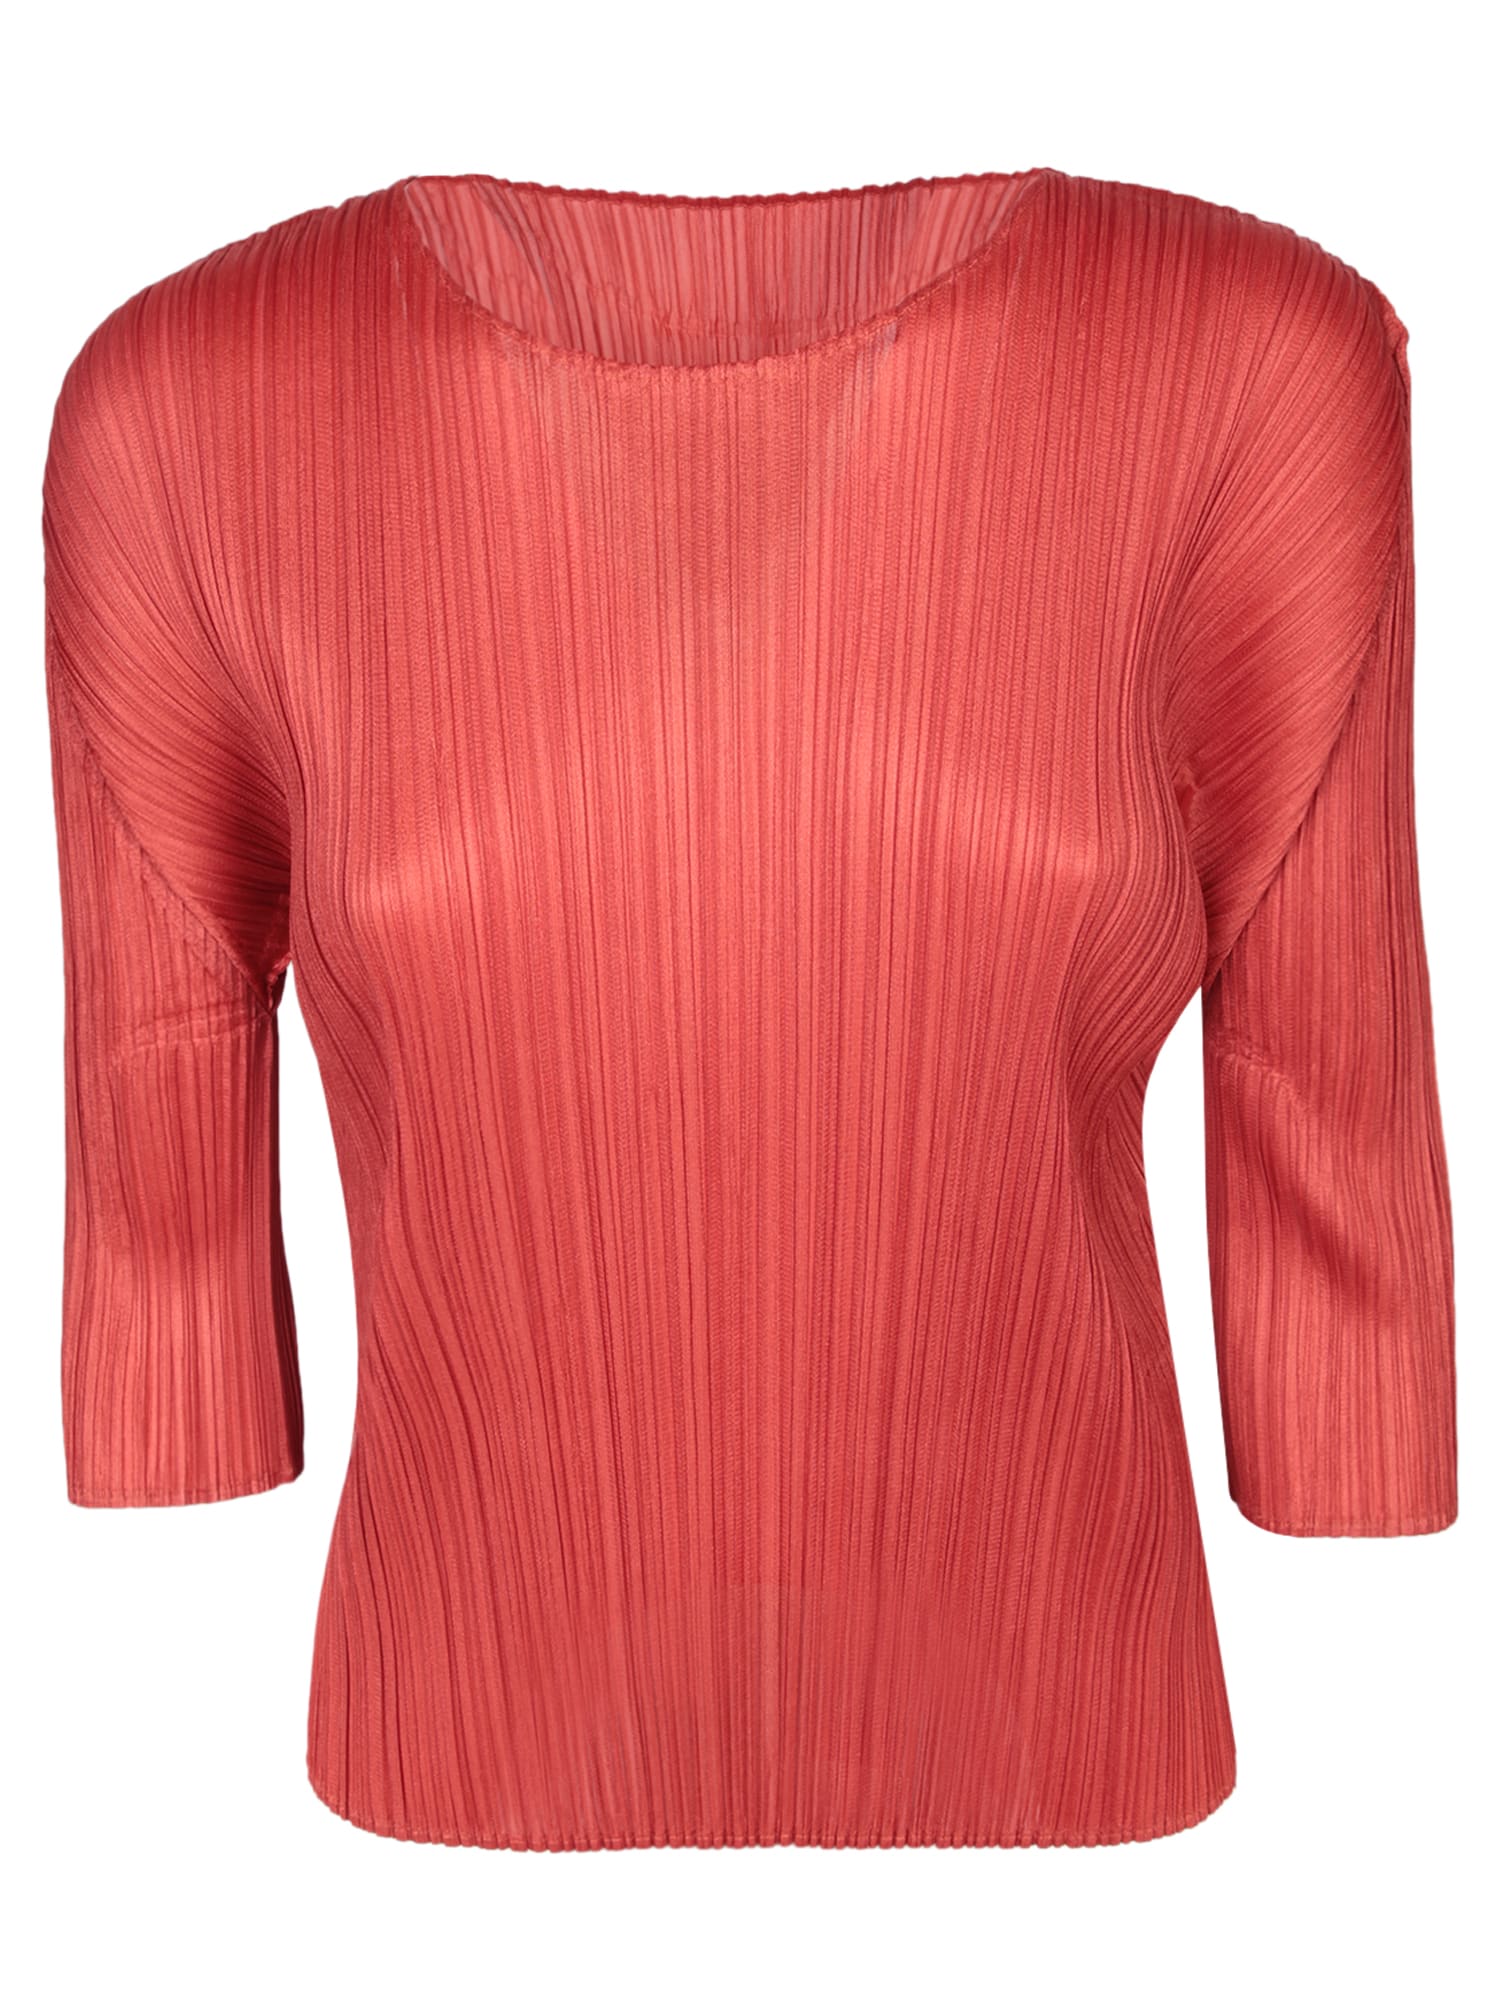 Shop Issey Miyake Pleats Please Red T-shirt